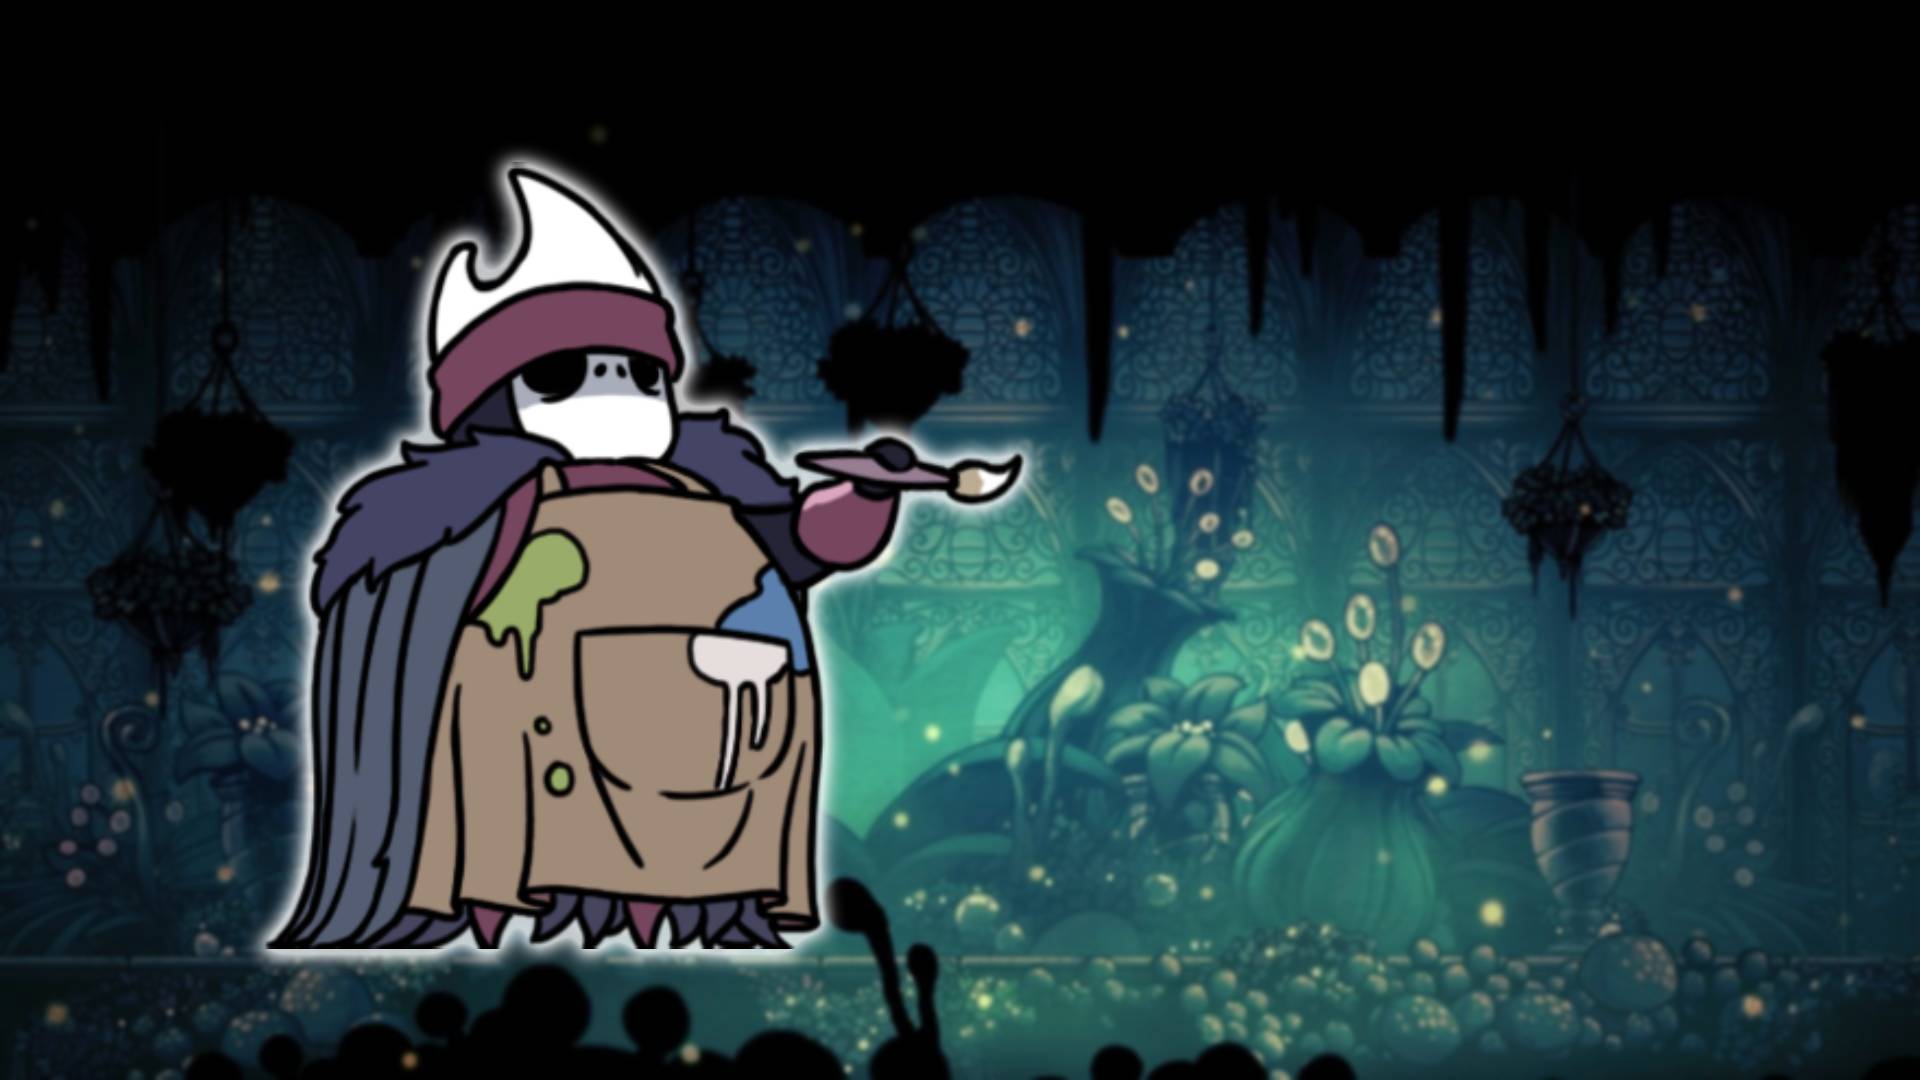 Paintmaster Sheo - the Hollow Knight boss, is visible against a mossy green background area from Hollow Knight 